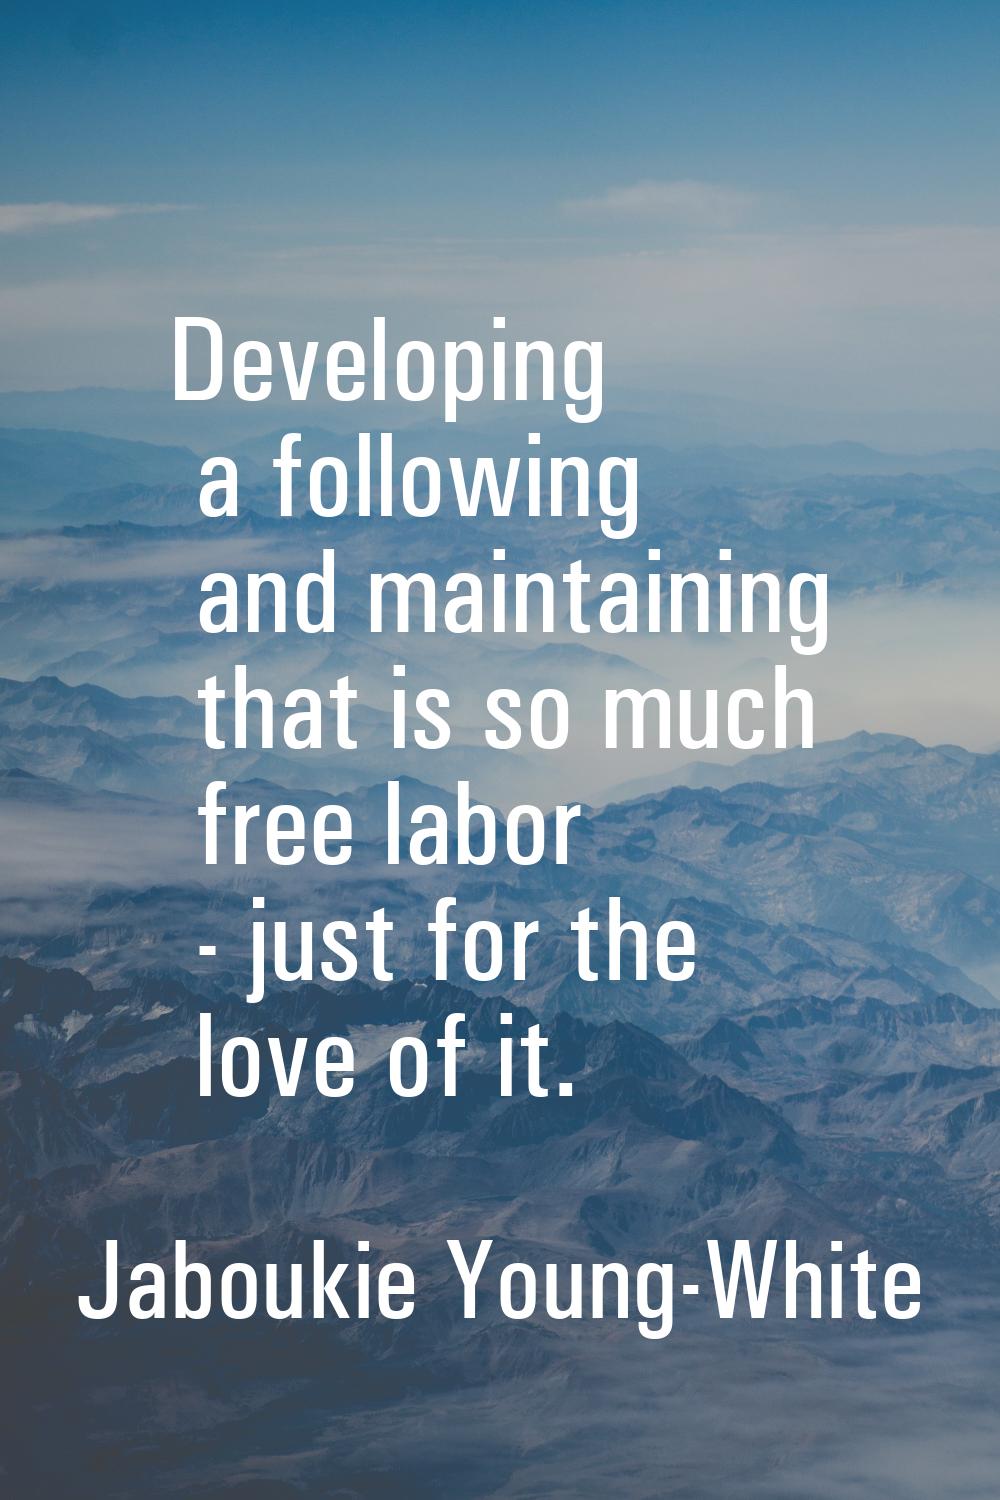 Developing a following and maintaining that is so much free labor - just for the love of it.